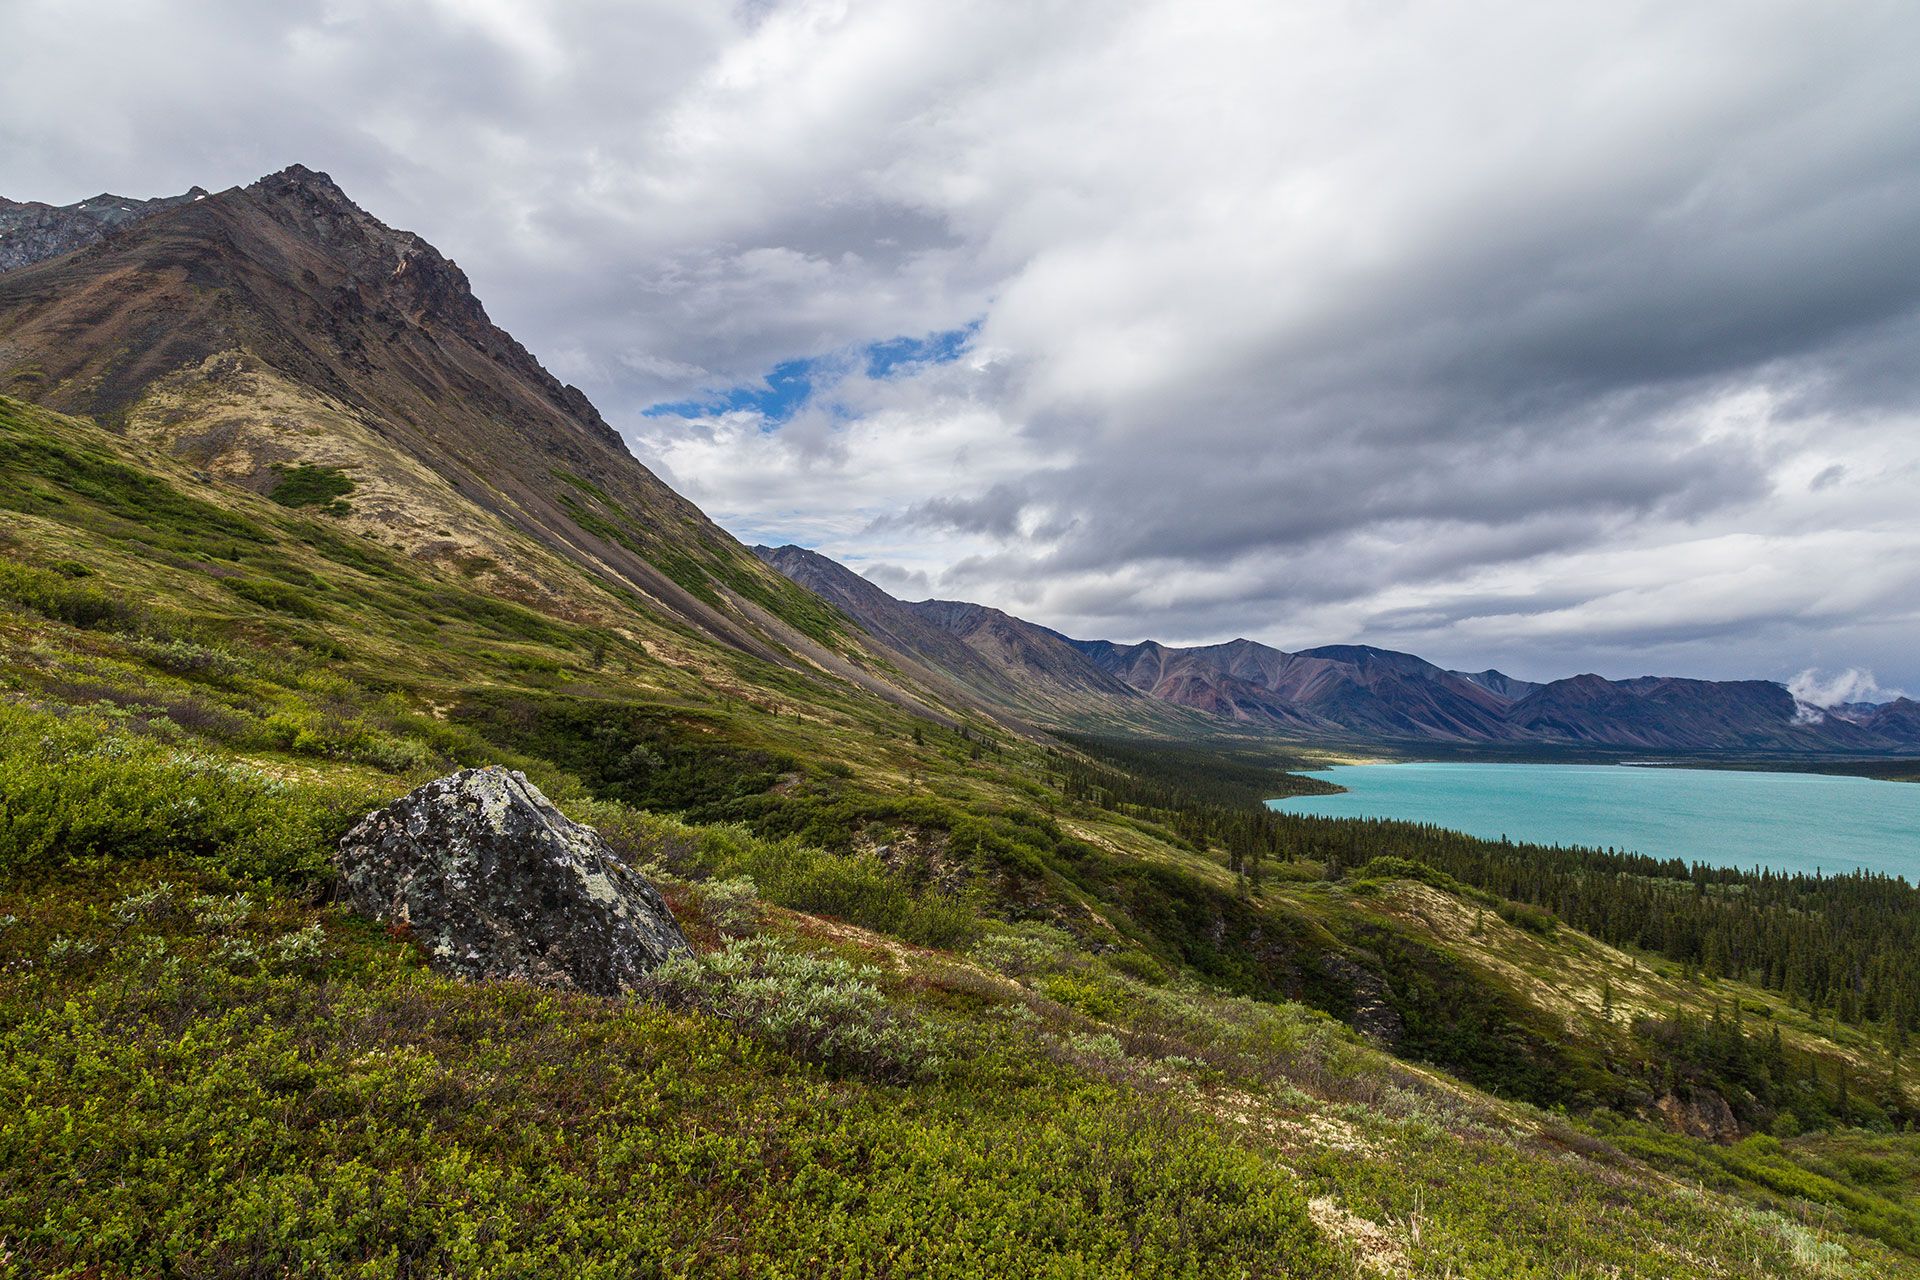 Getting to Lake Clark National Park and Preserve